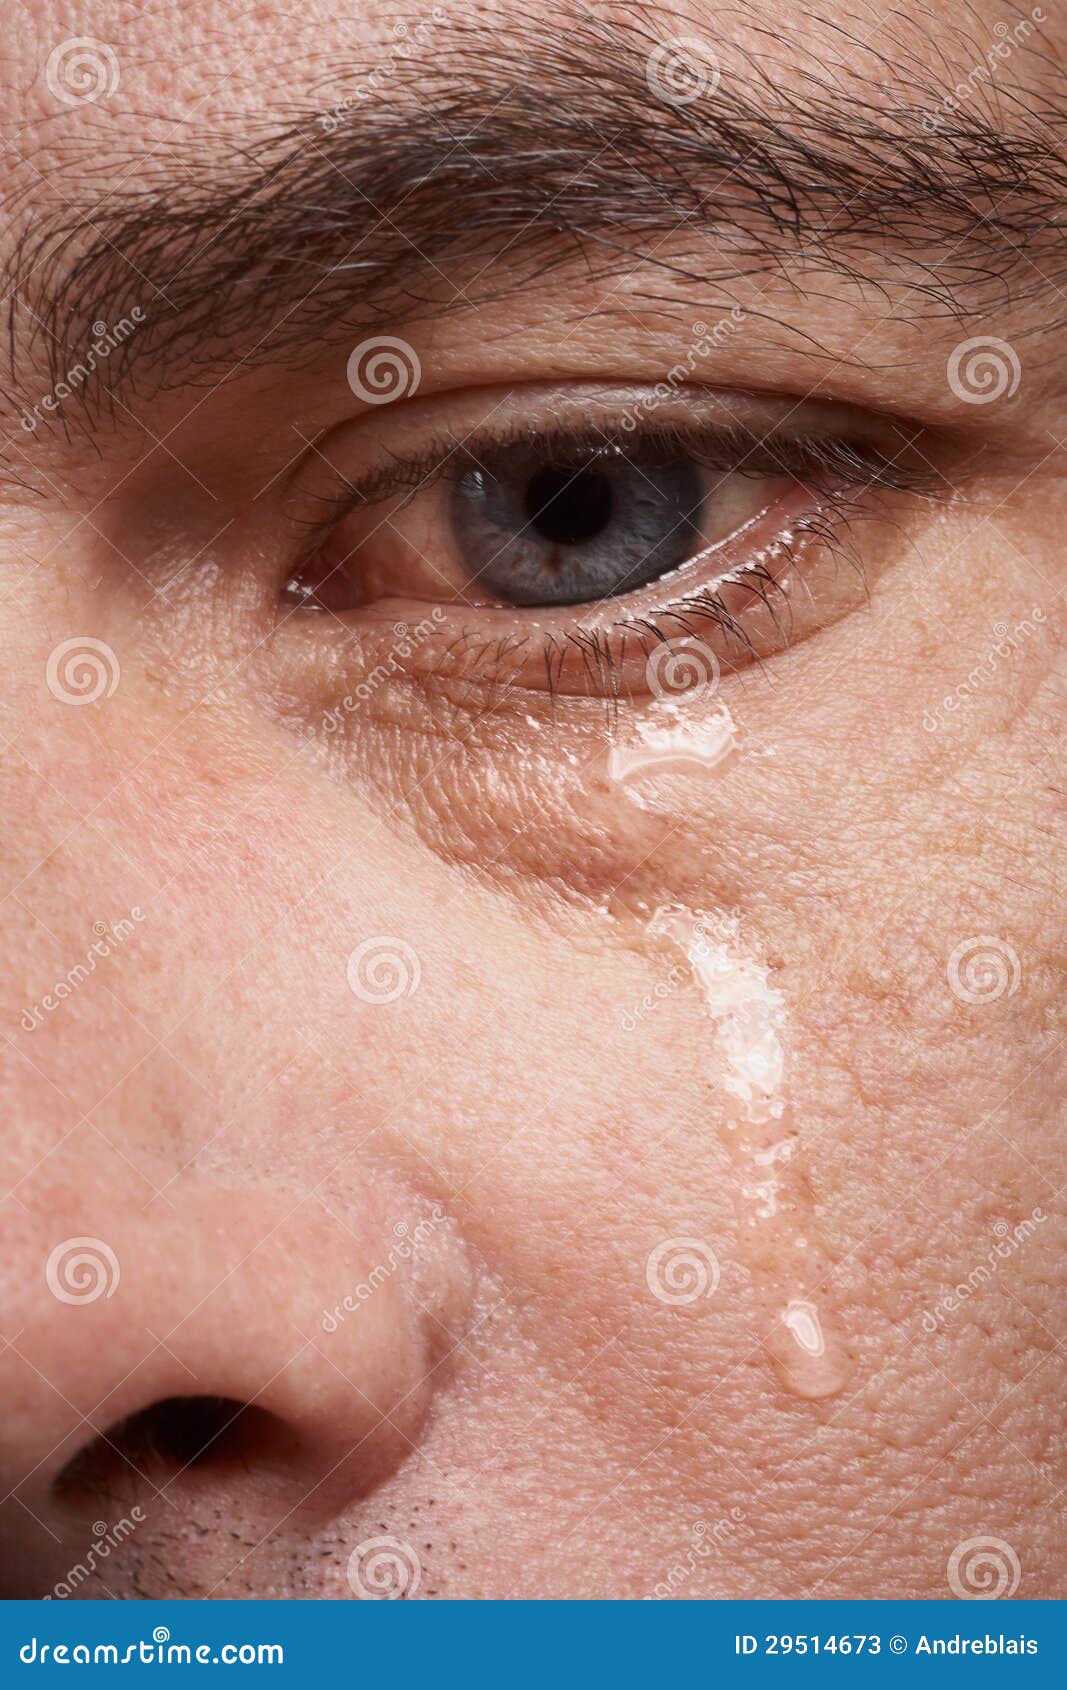 Crying man stock image. Image of expression, grieve, hopeless ...